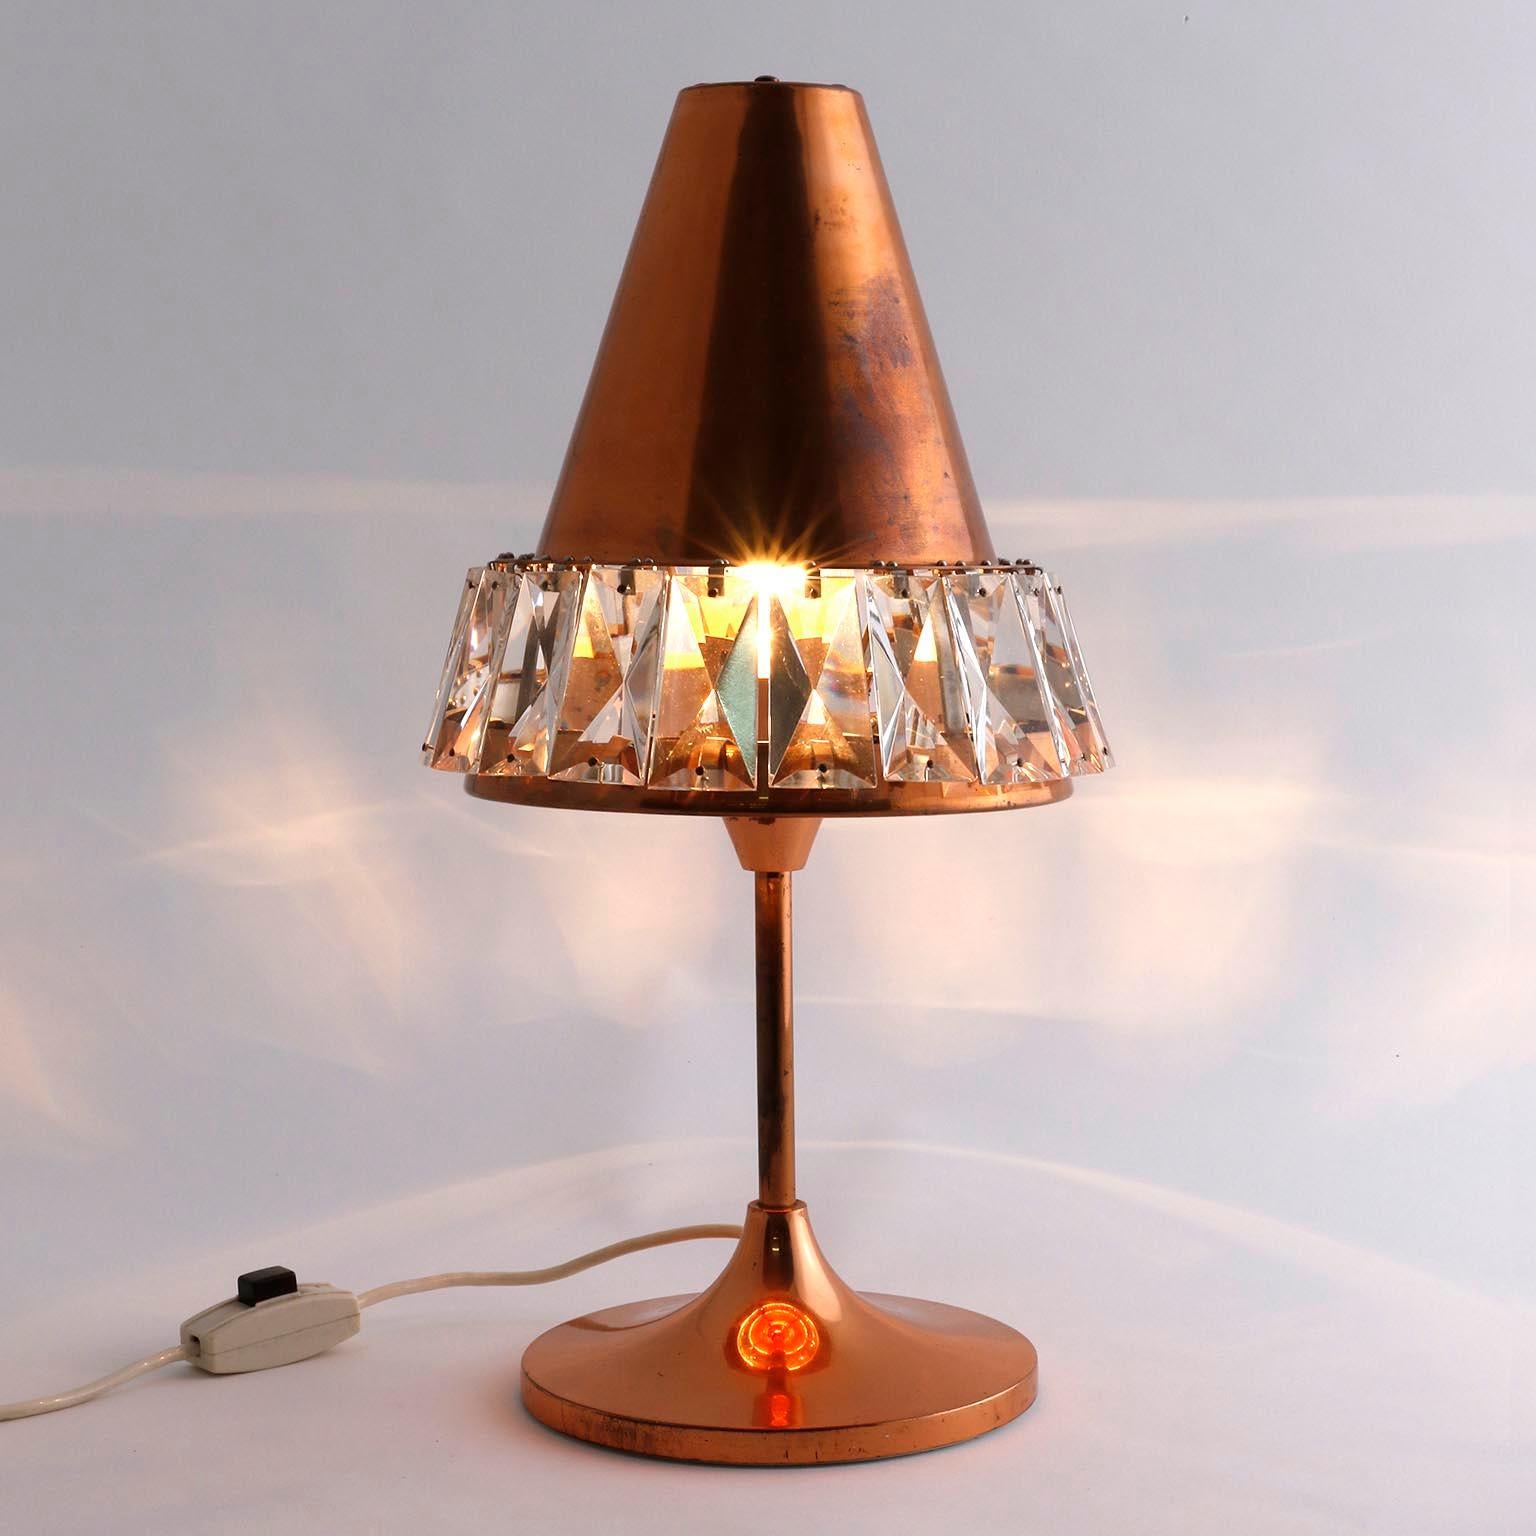 Bakalowits Table Lamp, Patinated Copper Nickel Crystal Glass, Austria, 1960s For Sale 1